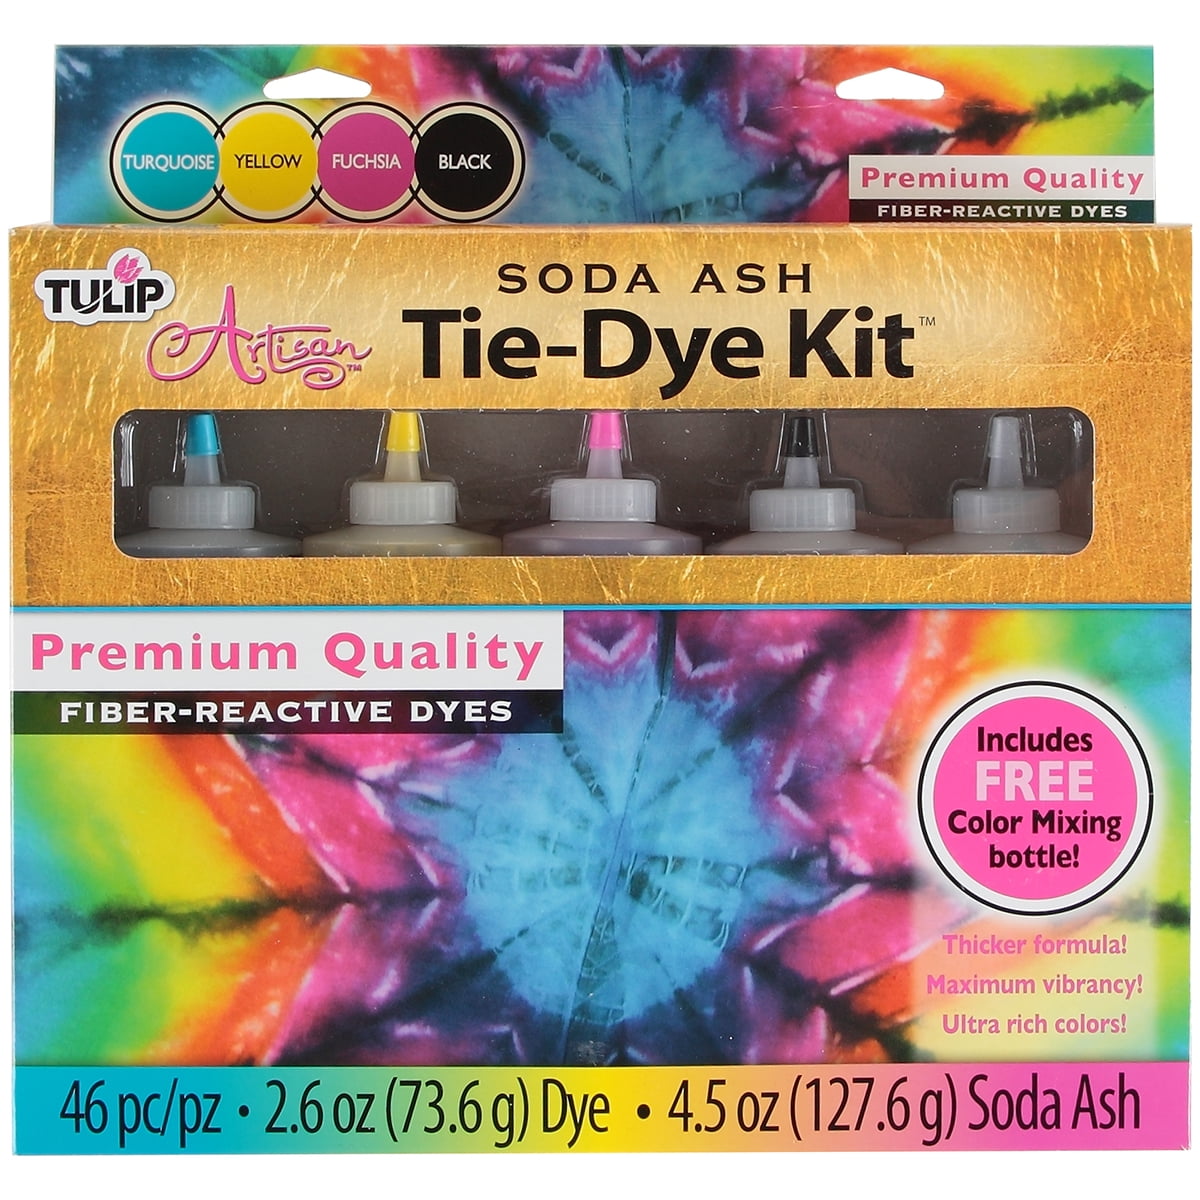 2 Pack Soda Ash for Tie Dye Shirts, DIY Projects, Arts and Crafts